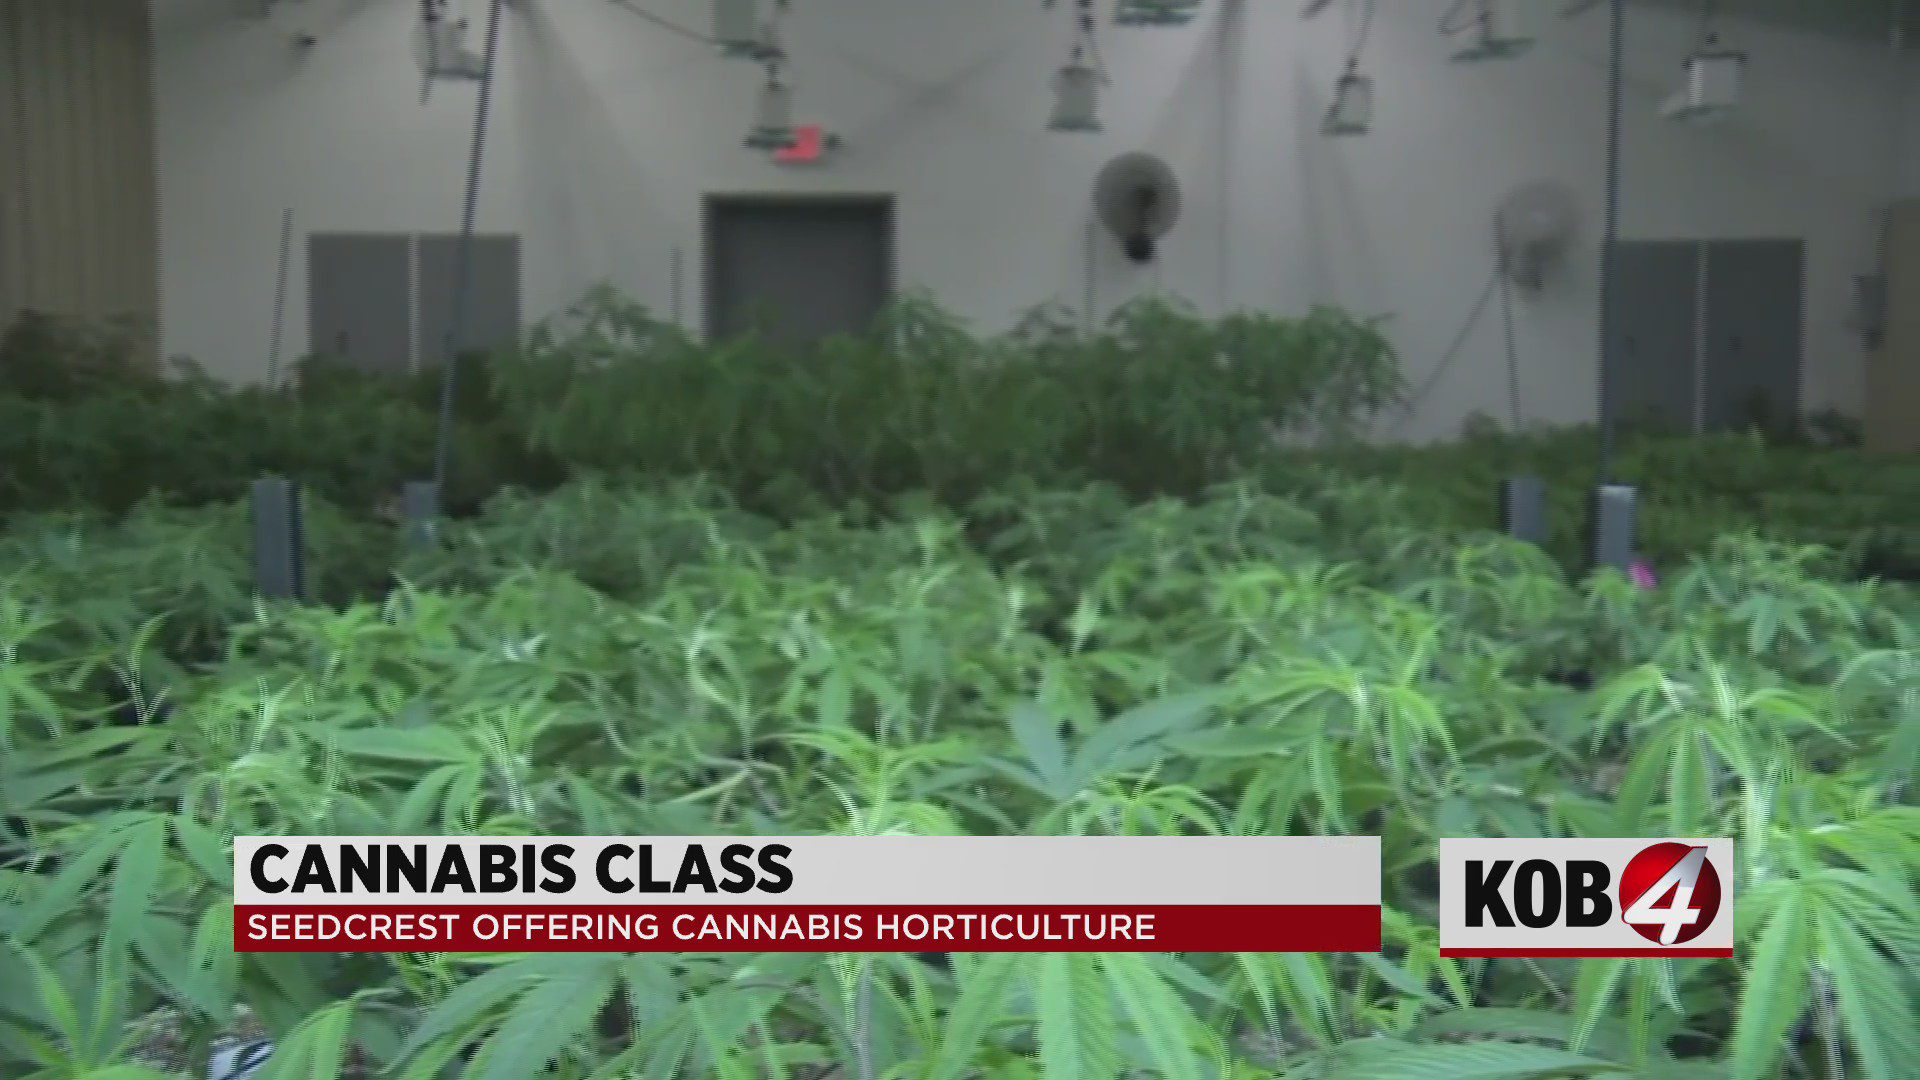 Local business offers boot camp cannabis course for new growers